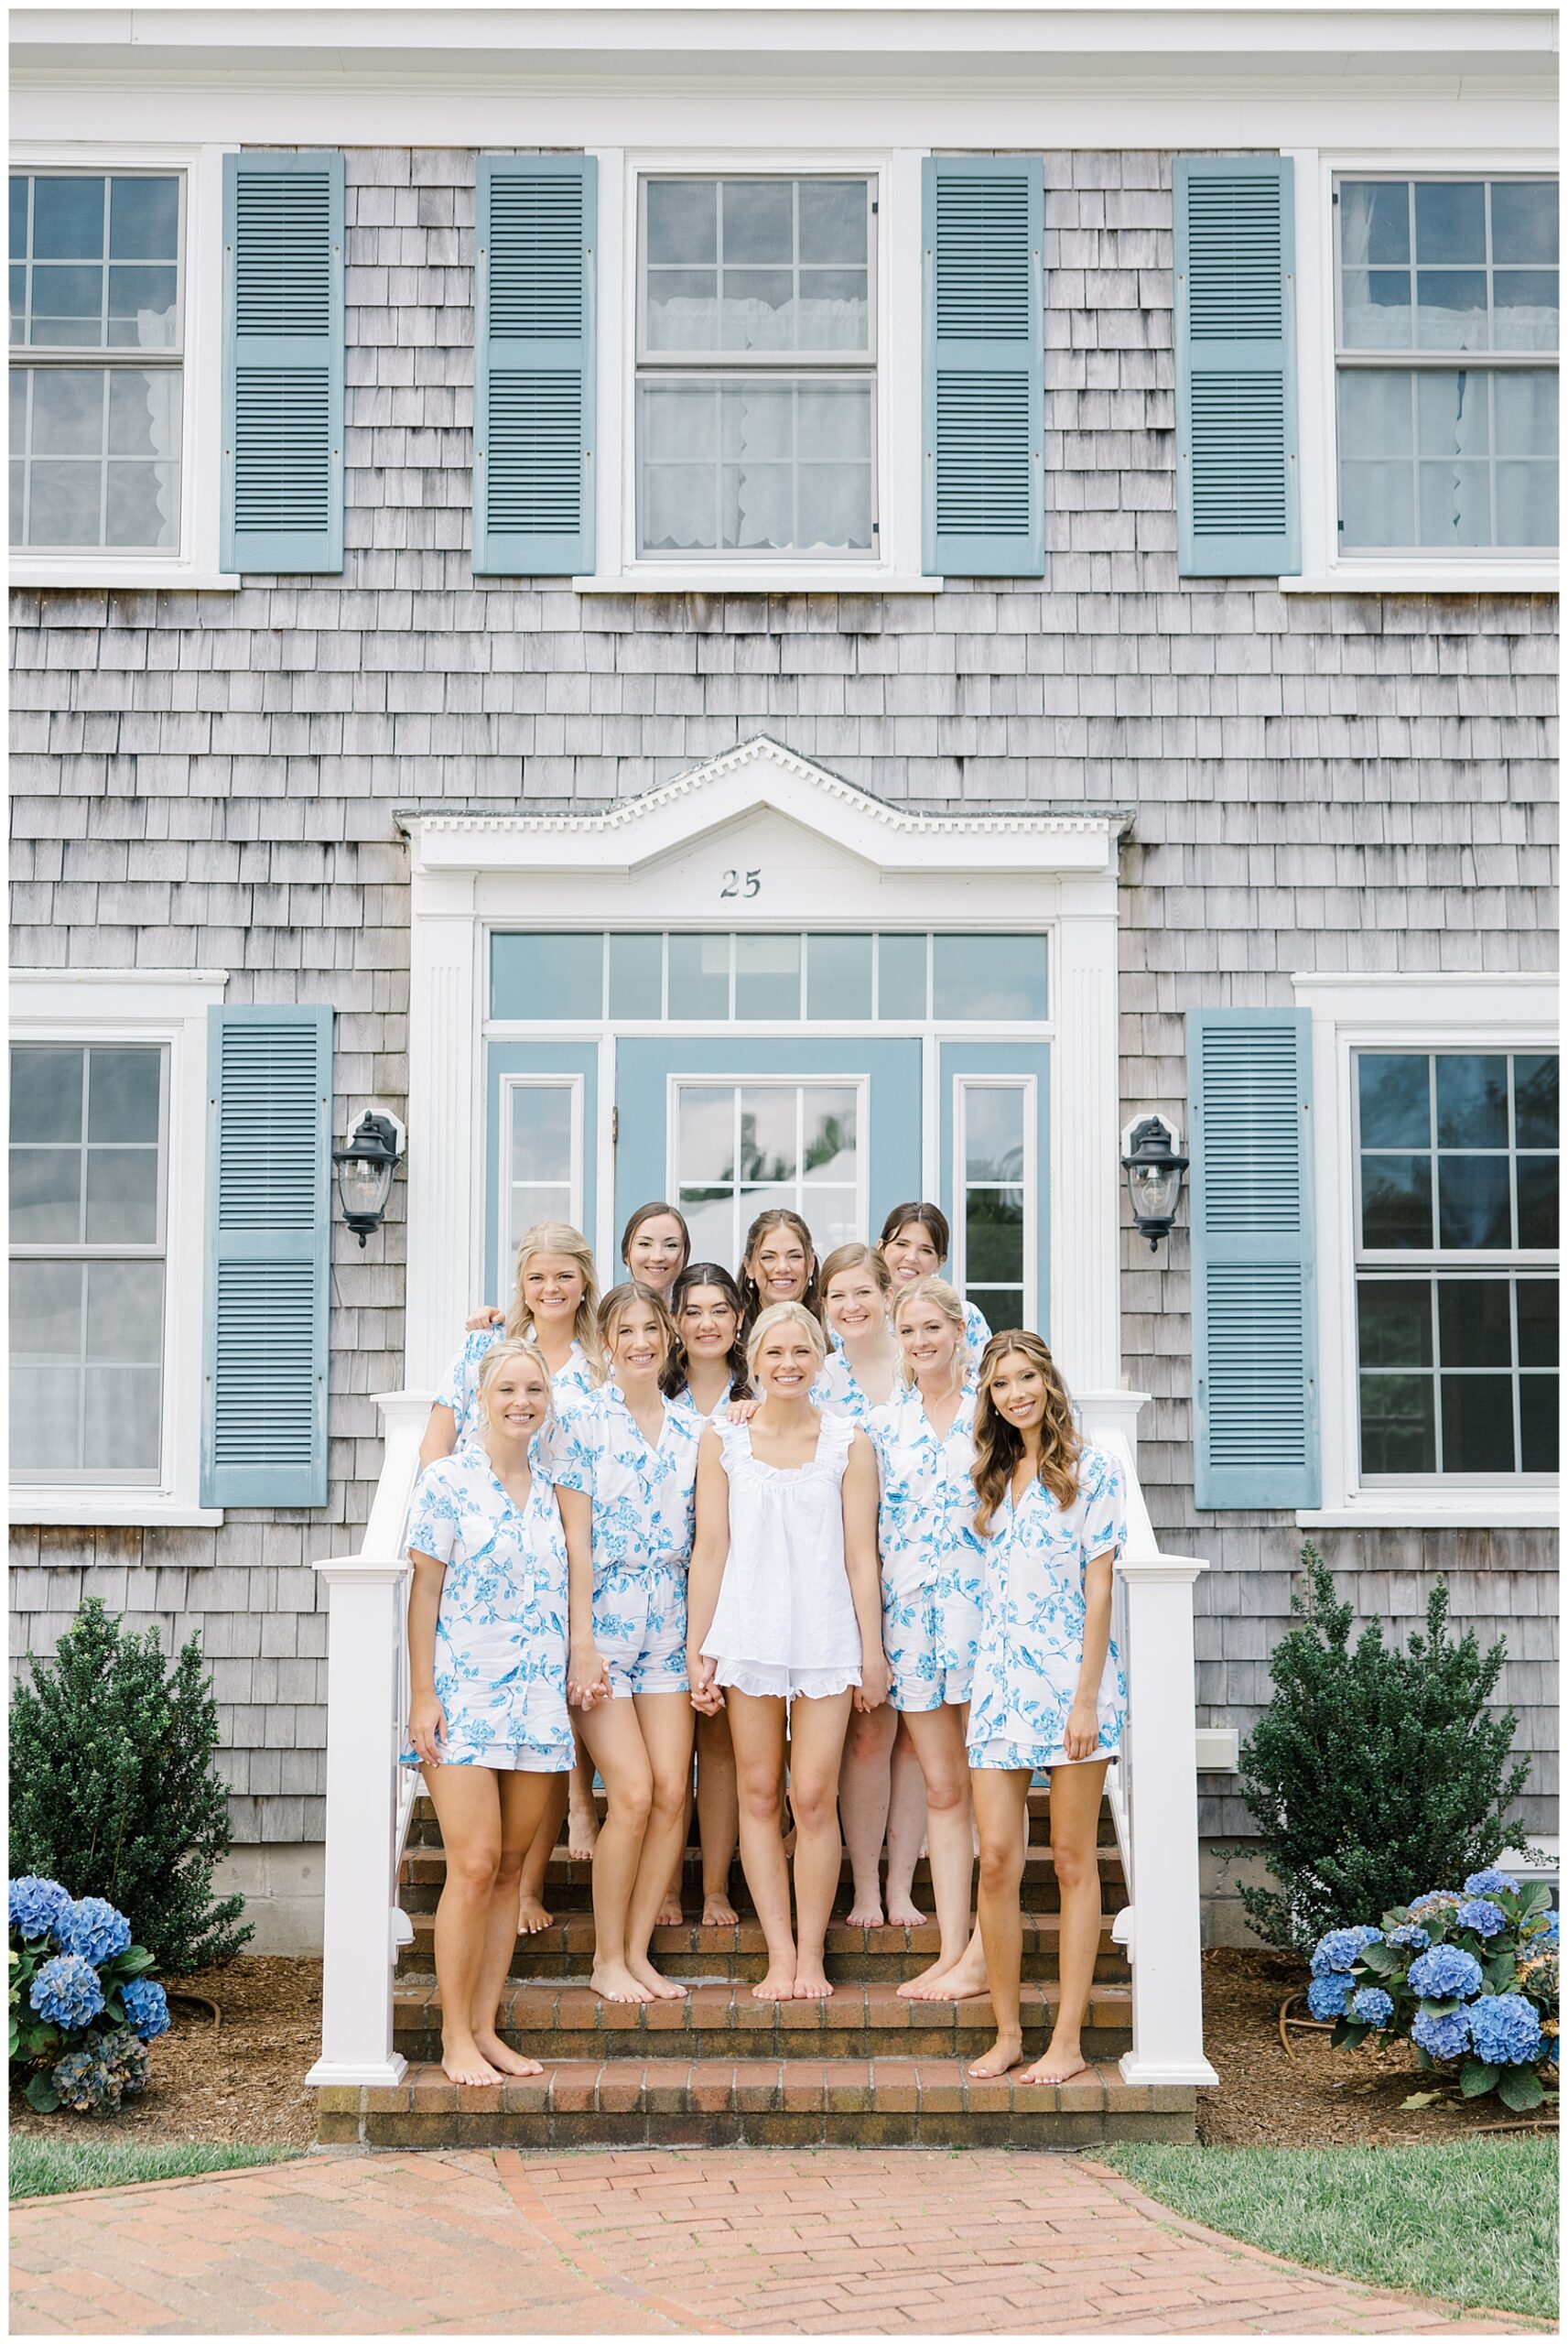 Bride and bridesmaids in matching pjs on steps of The Dennis Inn